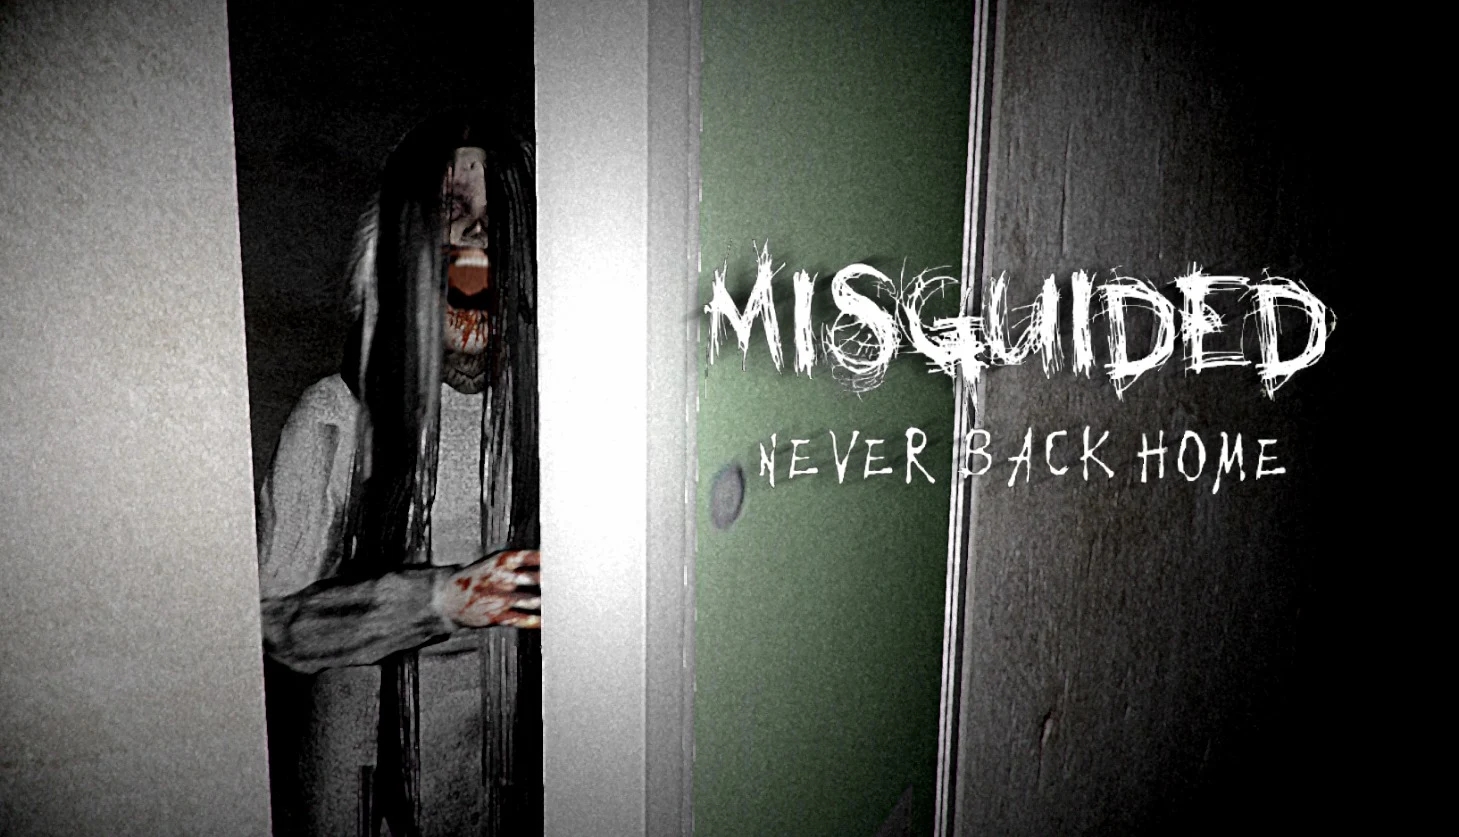 Misguided Never back home DEMO